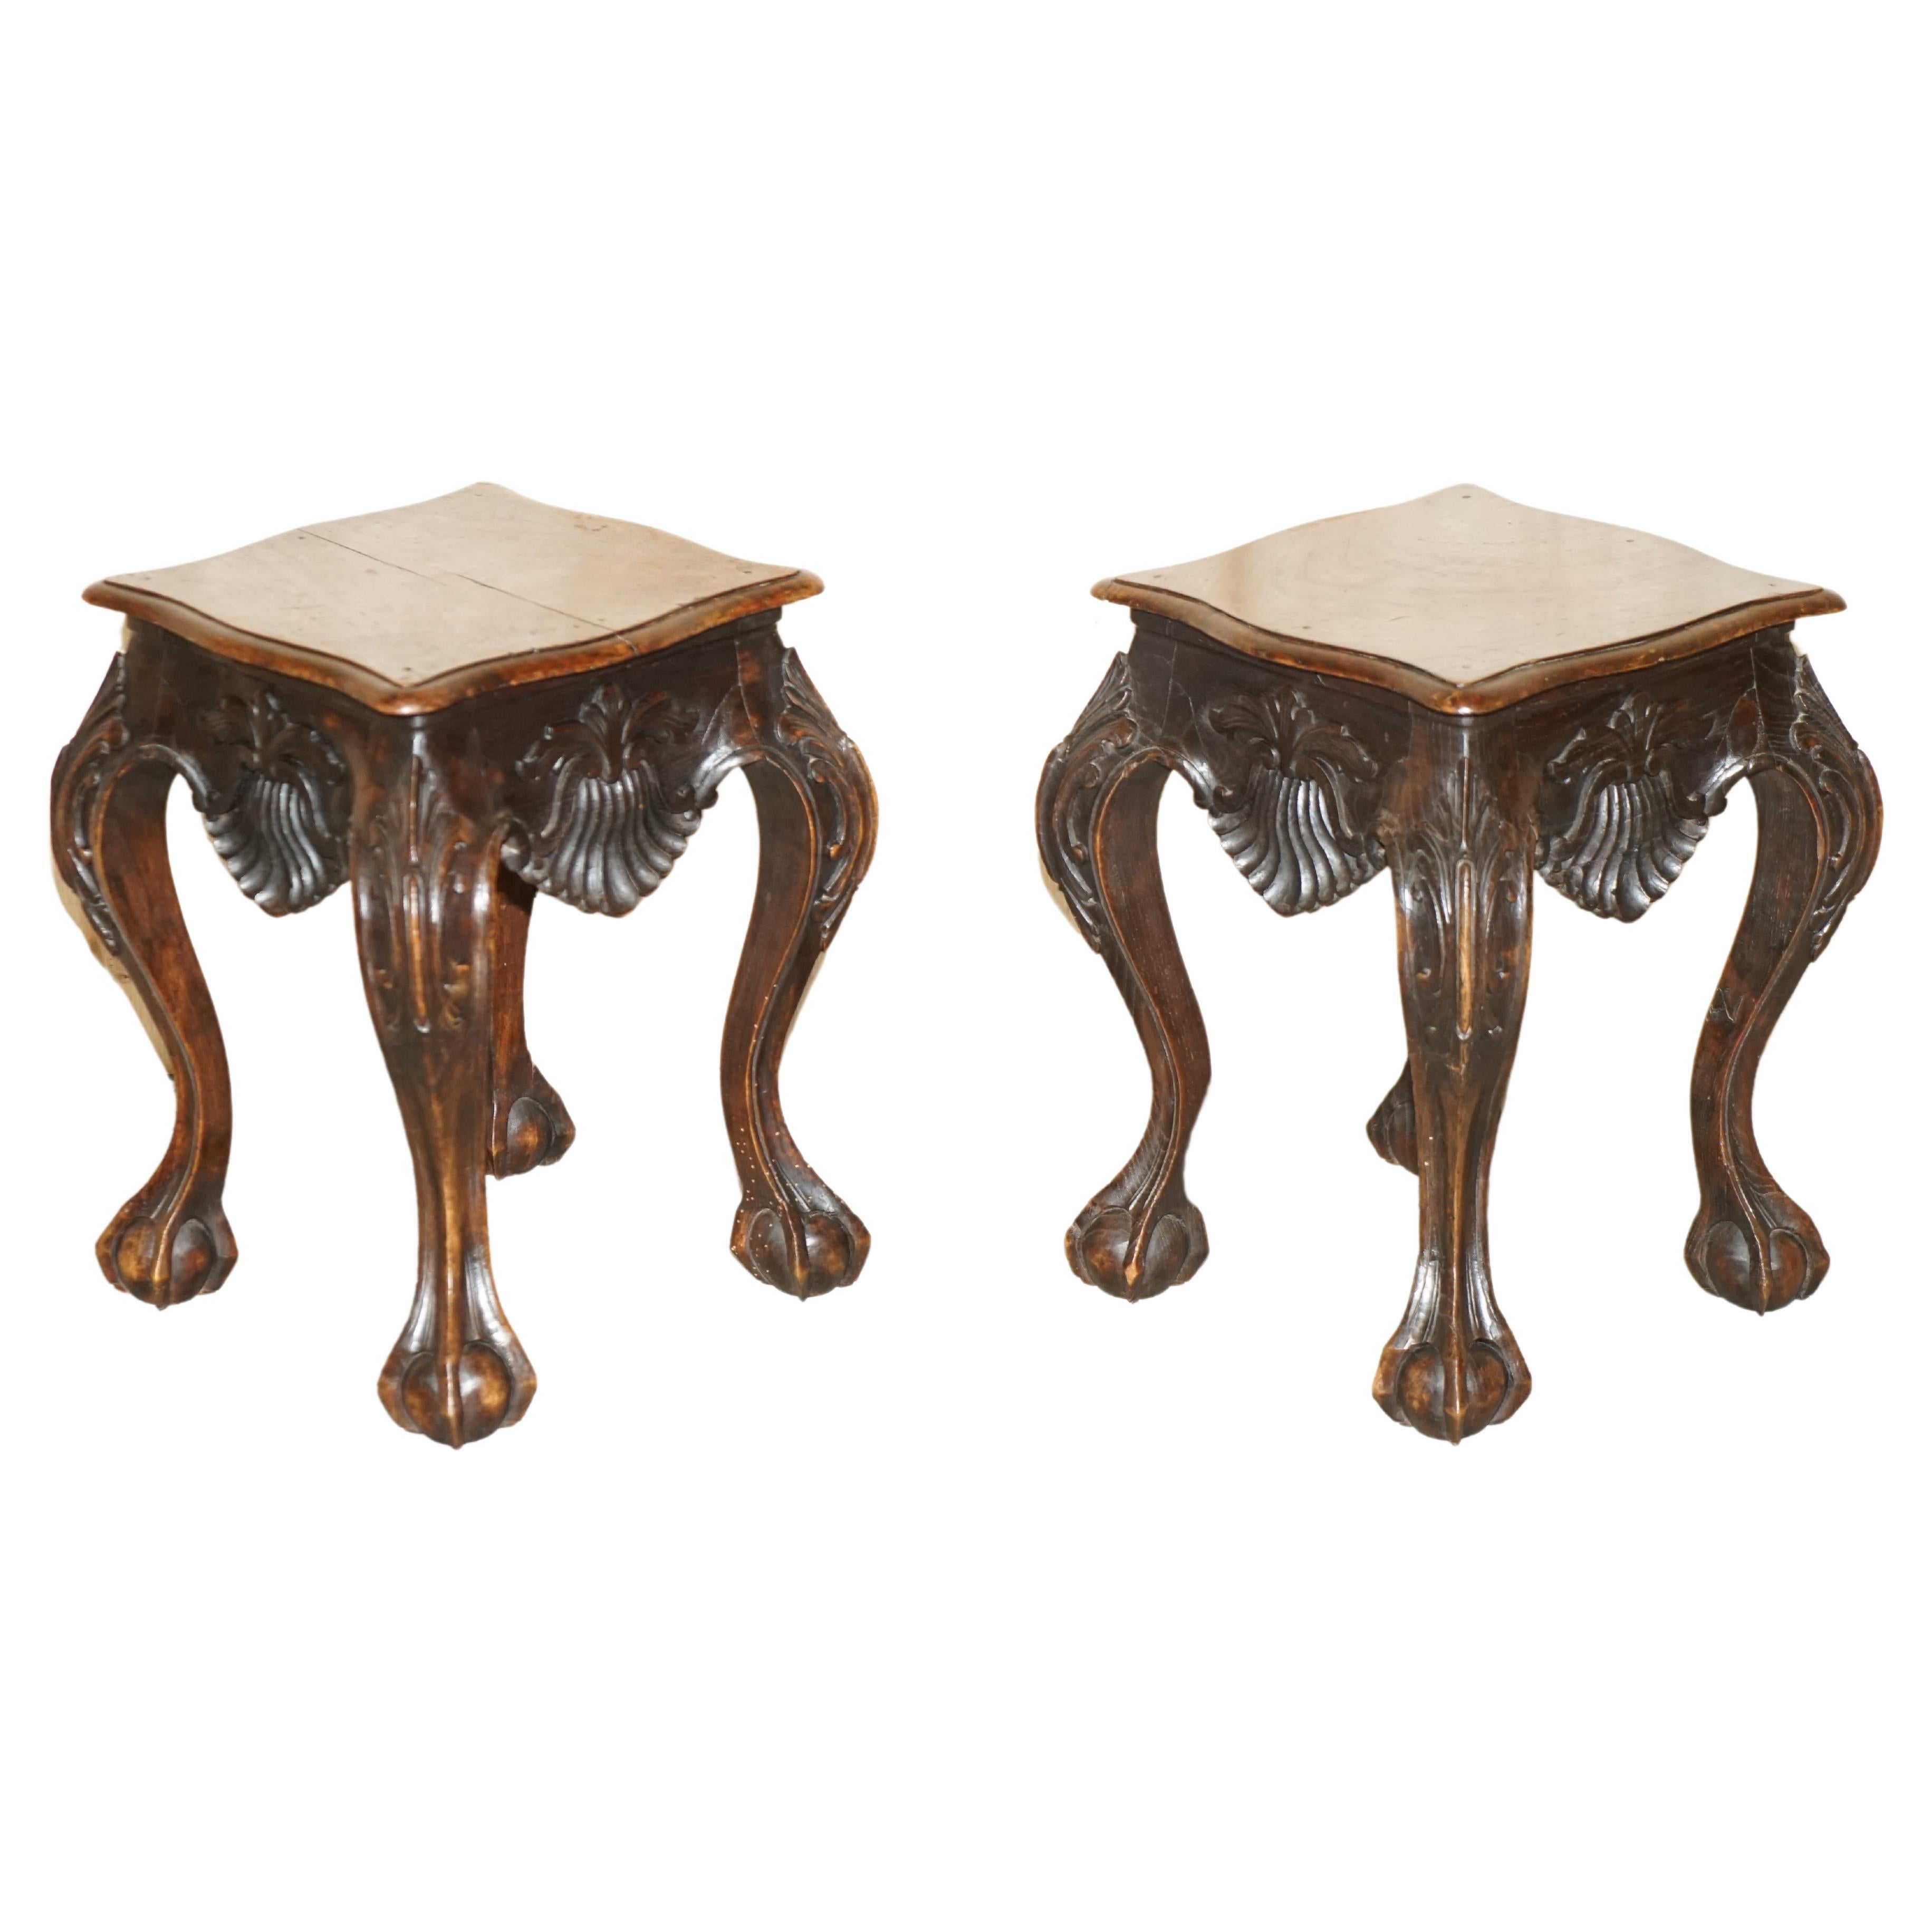 Lovely Pair of Antique circa 1900 Hand Carved Hardwood Claw & Ball Side Tables For Sale